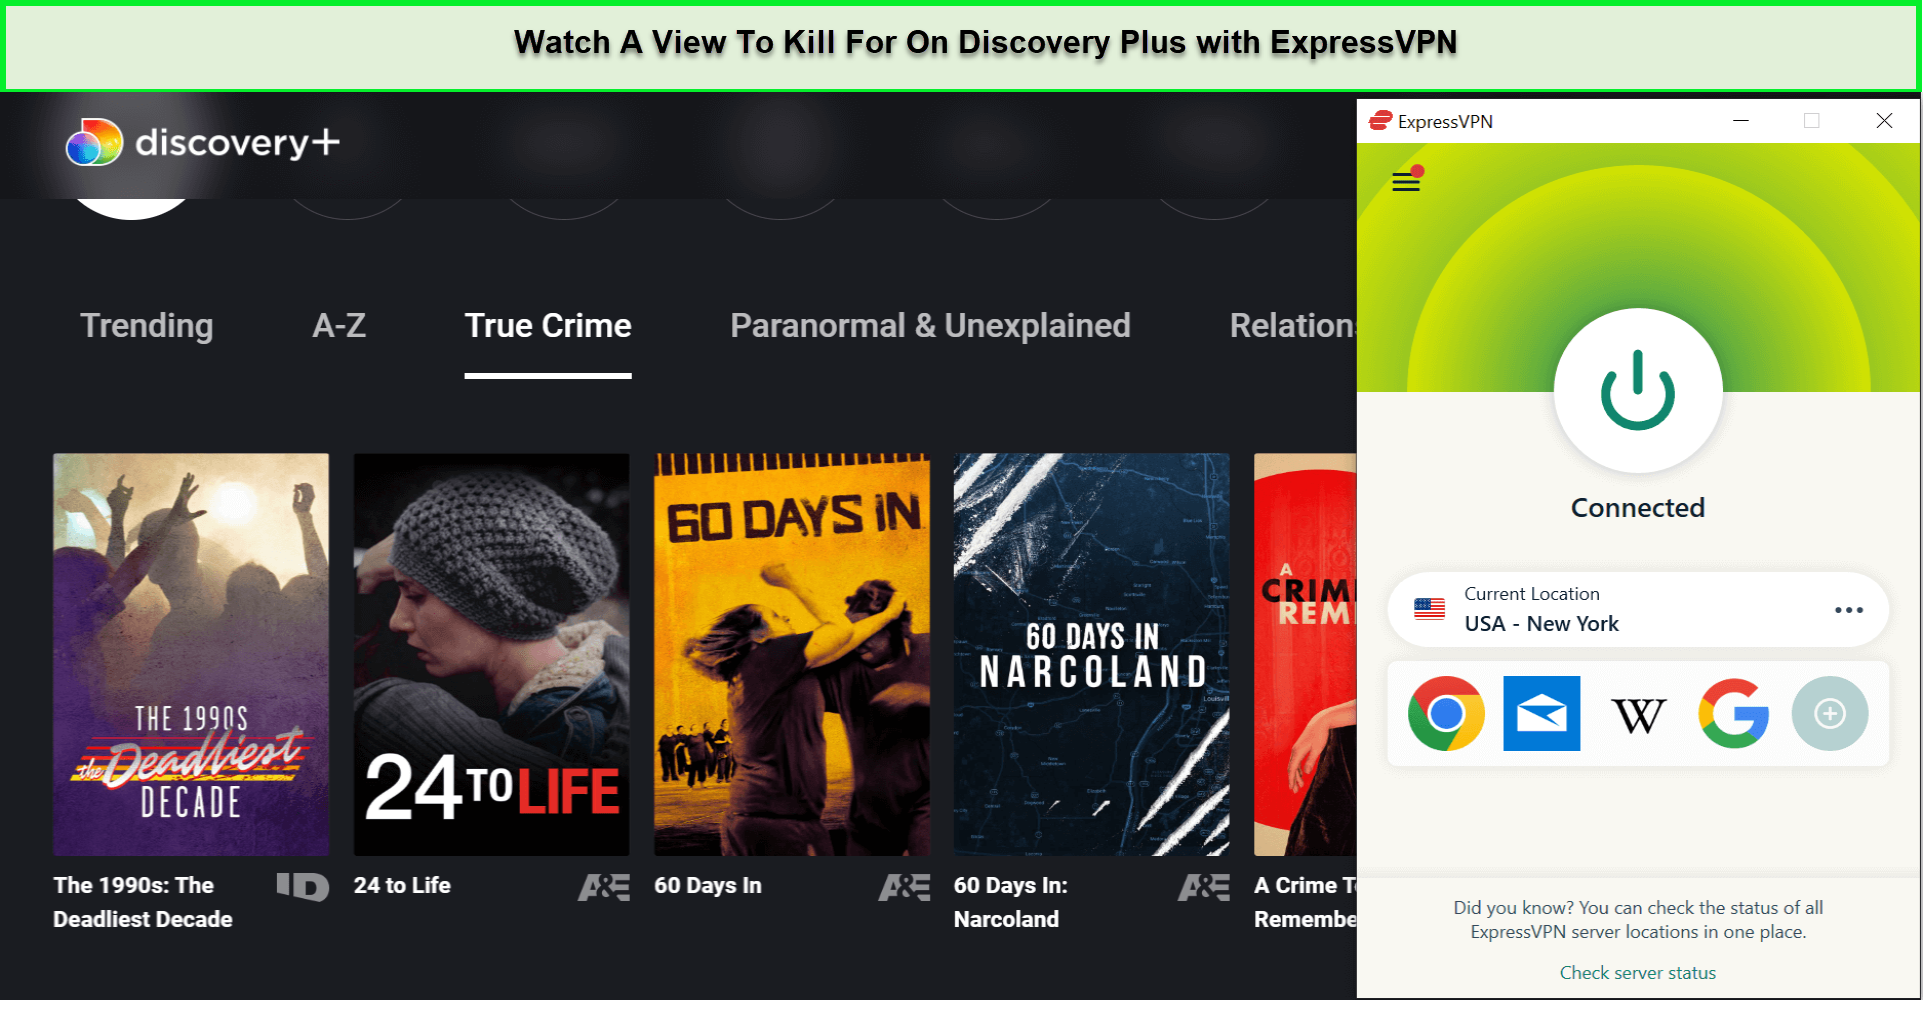 Watch-A-View-To-Kill-For-in-Australia-On-Discovery-Plus-with-ExpressVPN